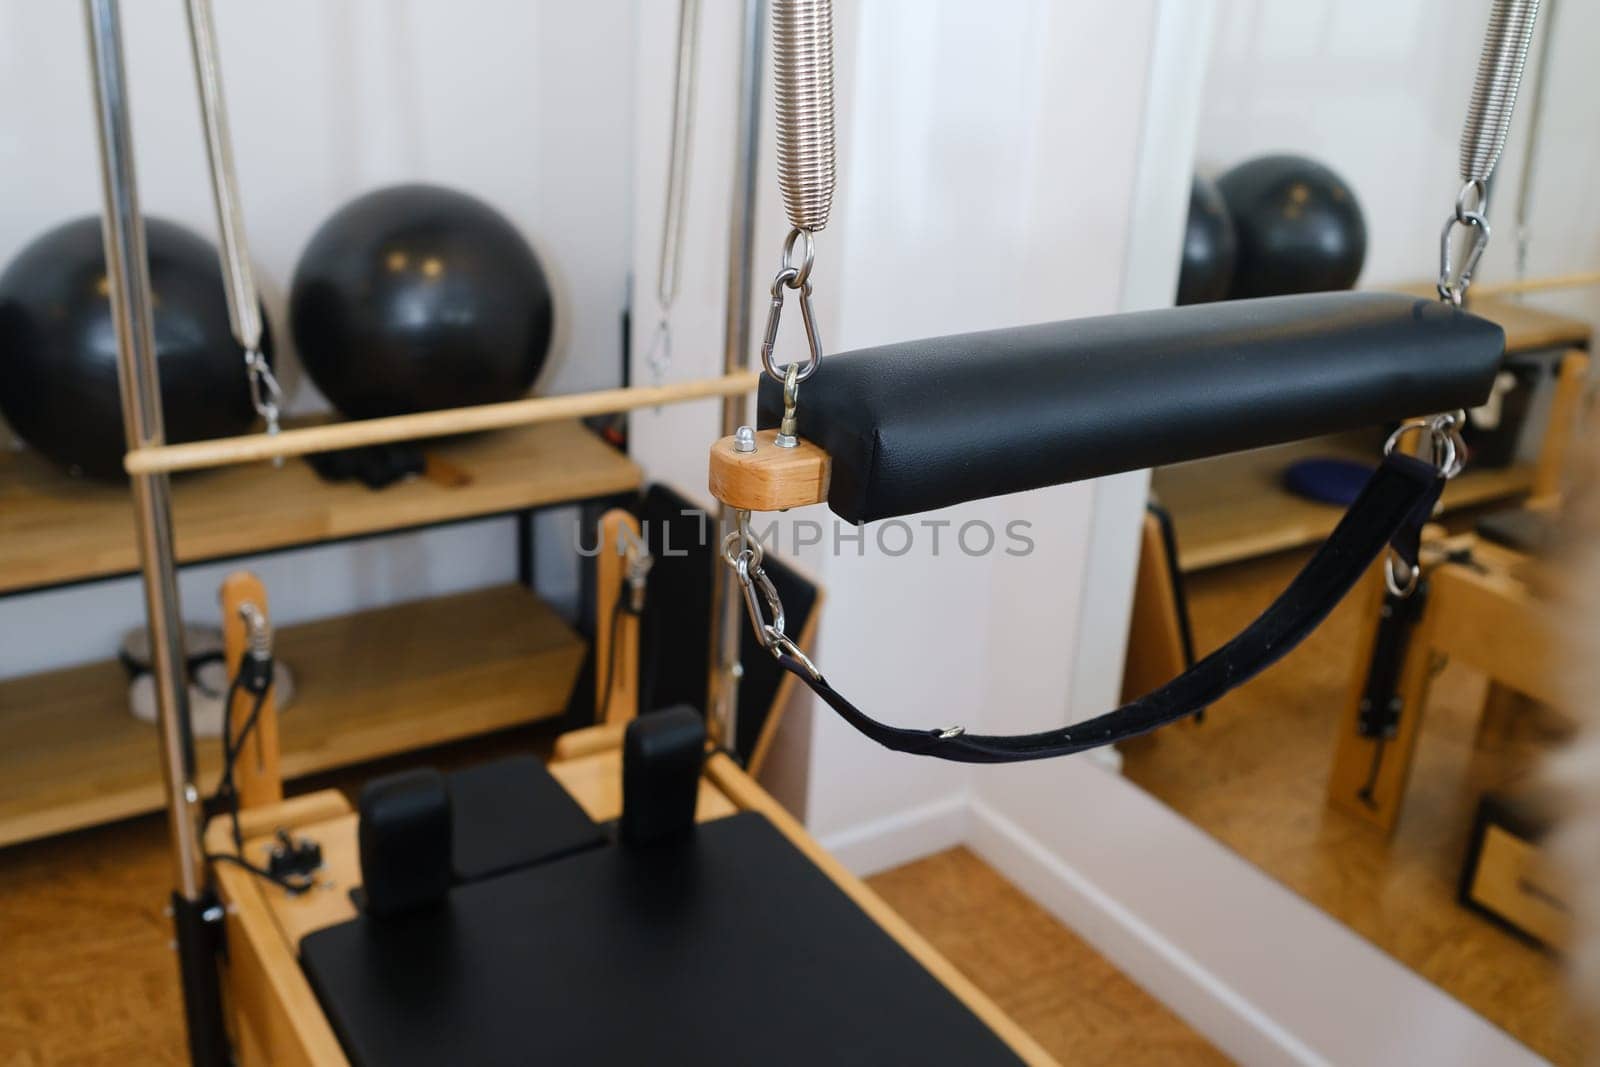 Trapeze table. Trapeze table - Pilates exercise machine by Lobachad